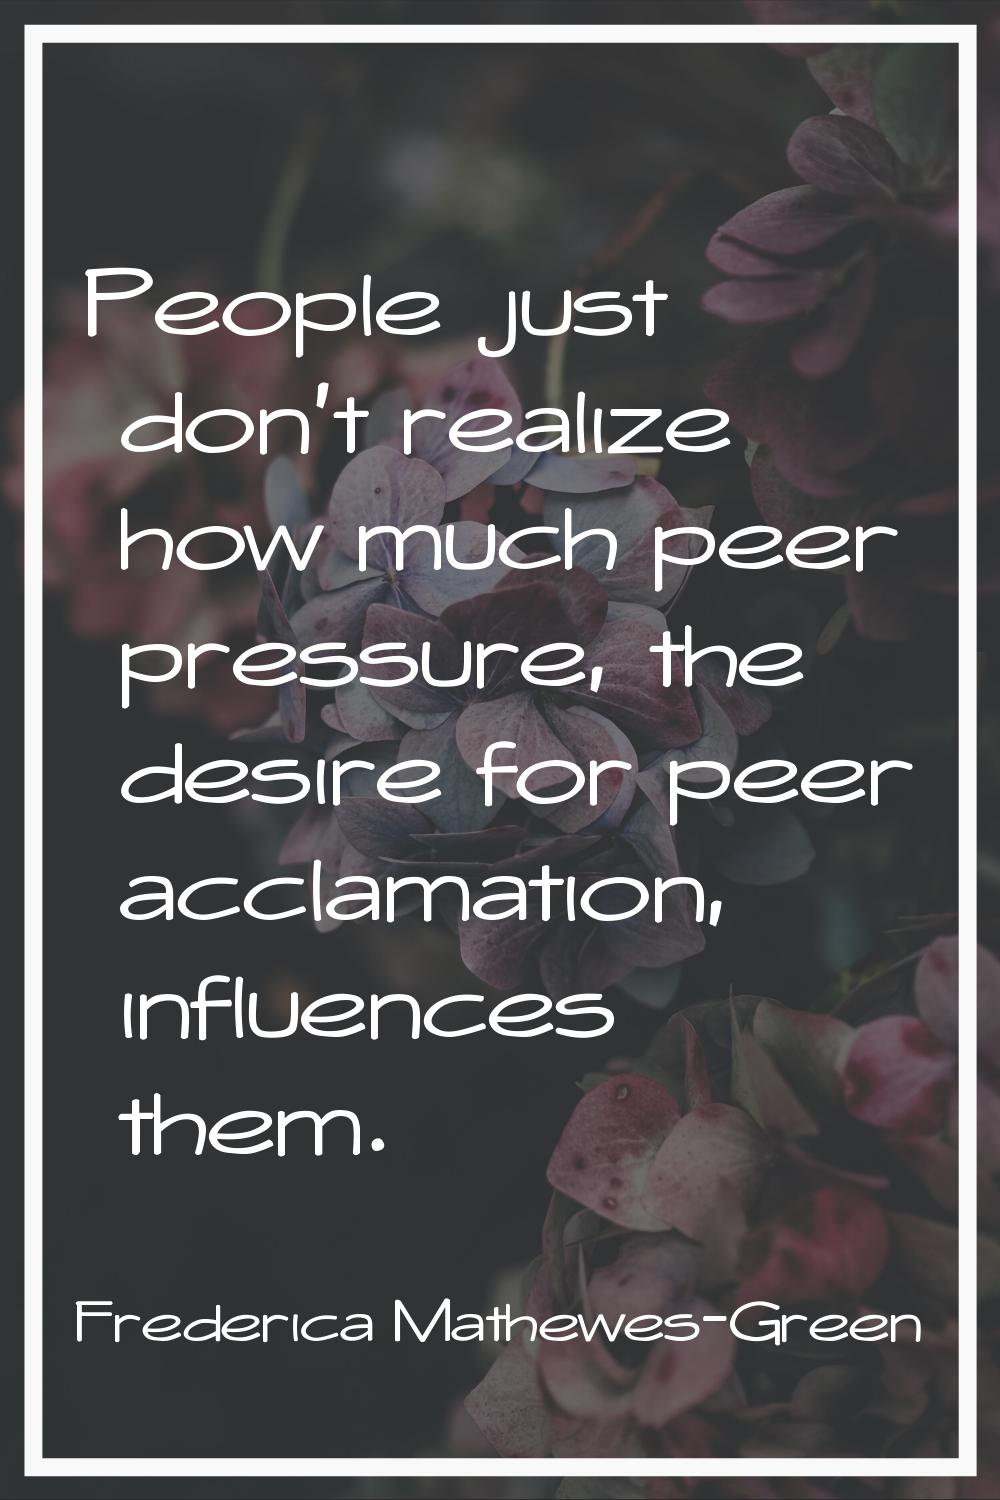 People just don't realize how much peer pressure, the desire for peer acclamation, influences them.